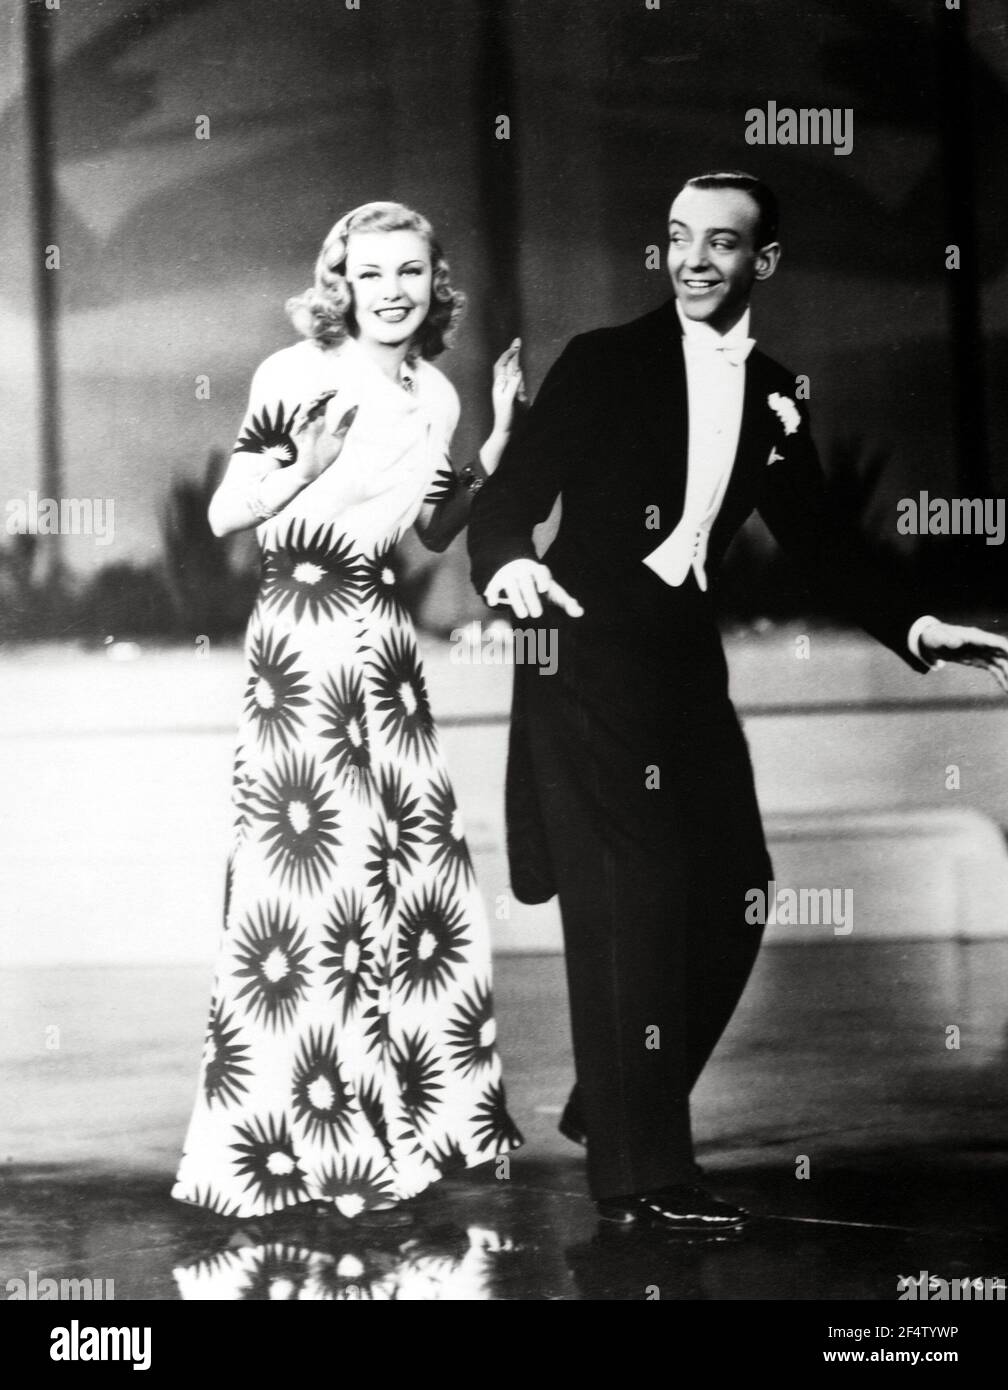 GINGER ROGERS and FRED ASTAIRE in SHALL WE DANCE (1937), directed by MARK SANDRICH. Credit: RKO / Album Stock Photo